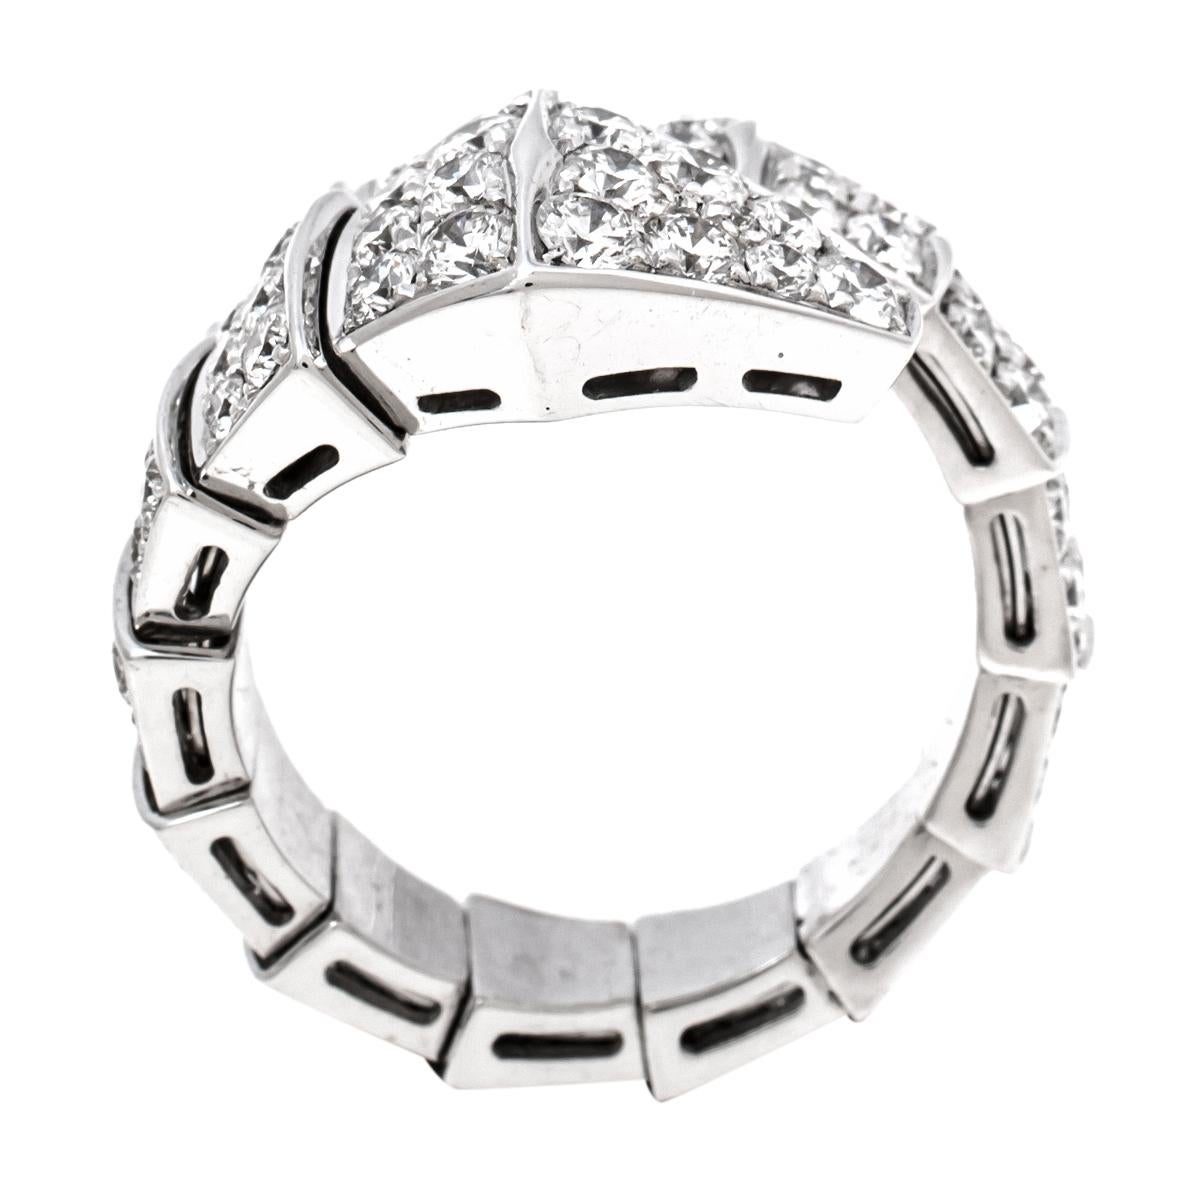 Inspired by the viper’s spiral movements, this stunning Bvlgari Serpenti Viper ring will wrap sensually around your finger. Distinguished by the alluring beauty of the viper's scales, this 18K white gold ring highlights the entire design with